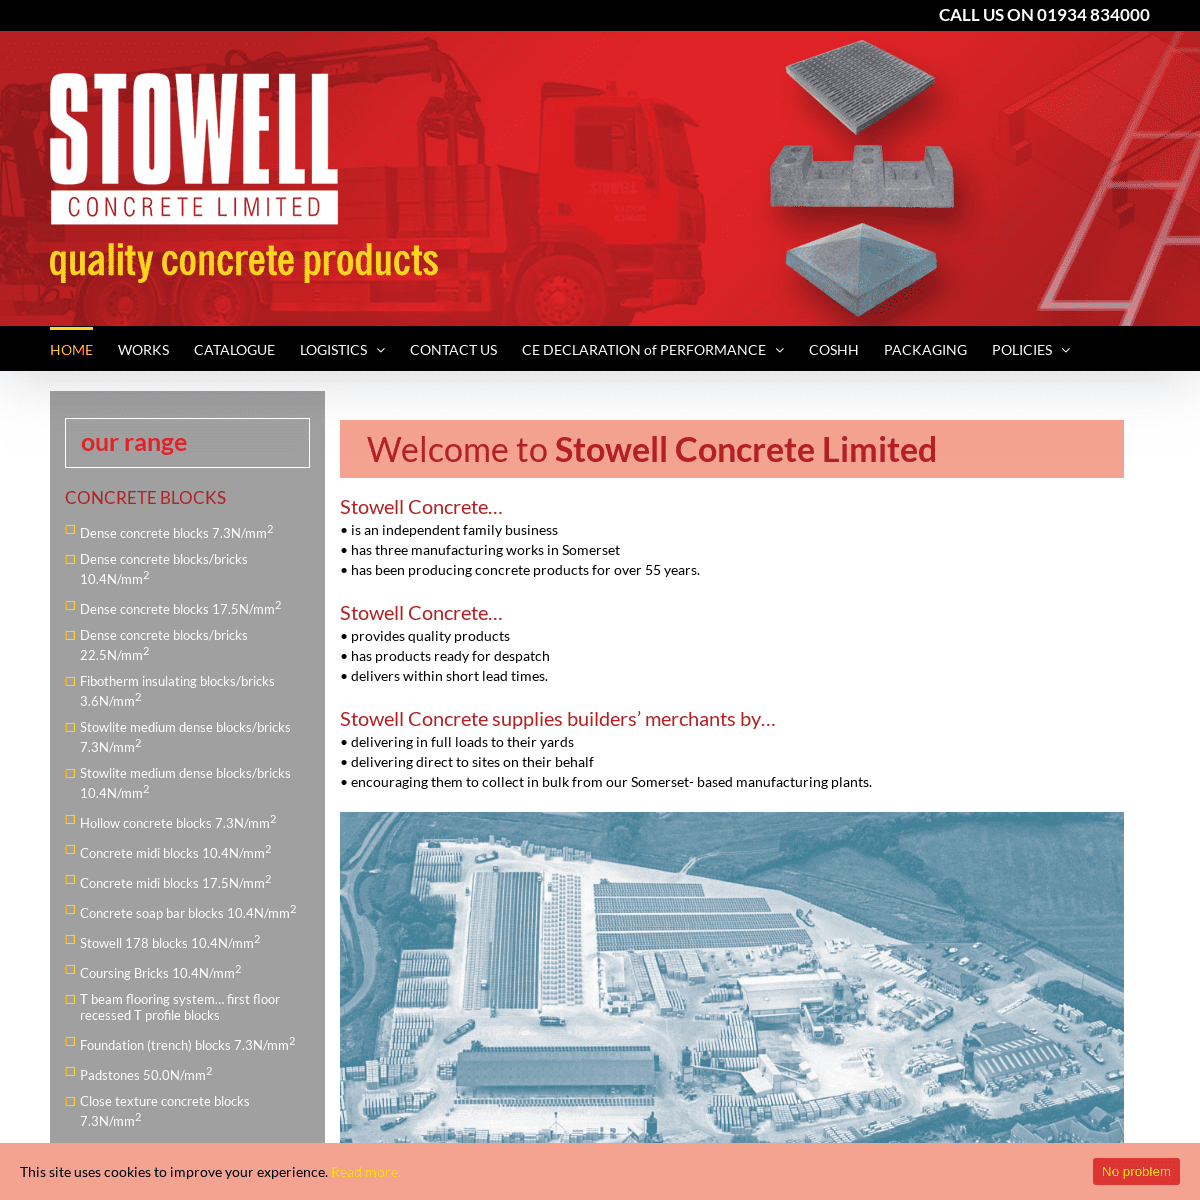 A complete backup of stowellconcrete.co.uk